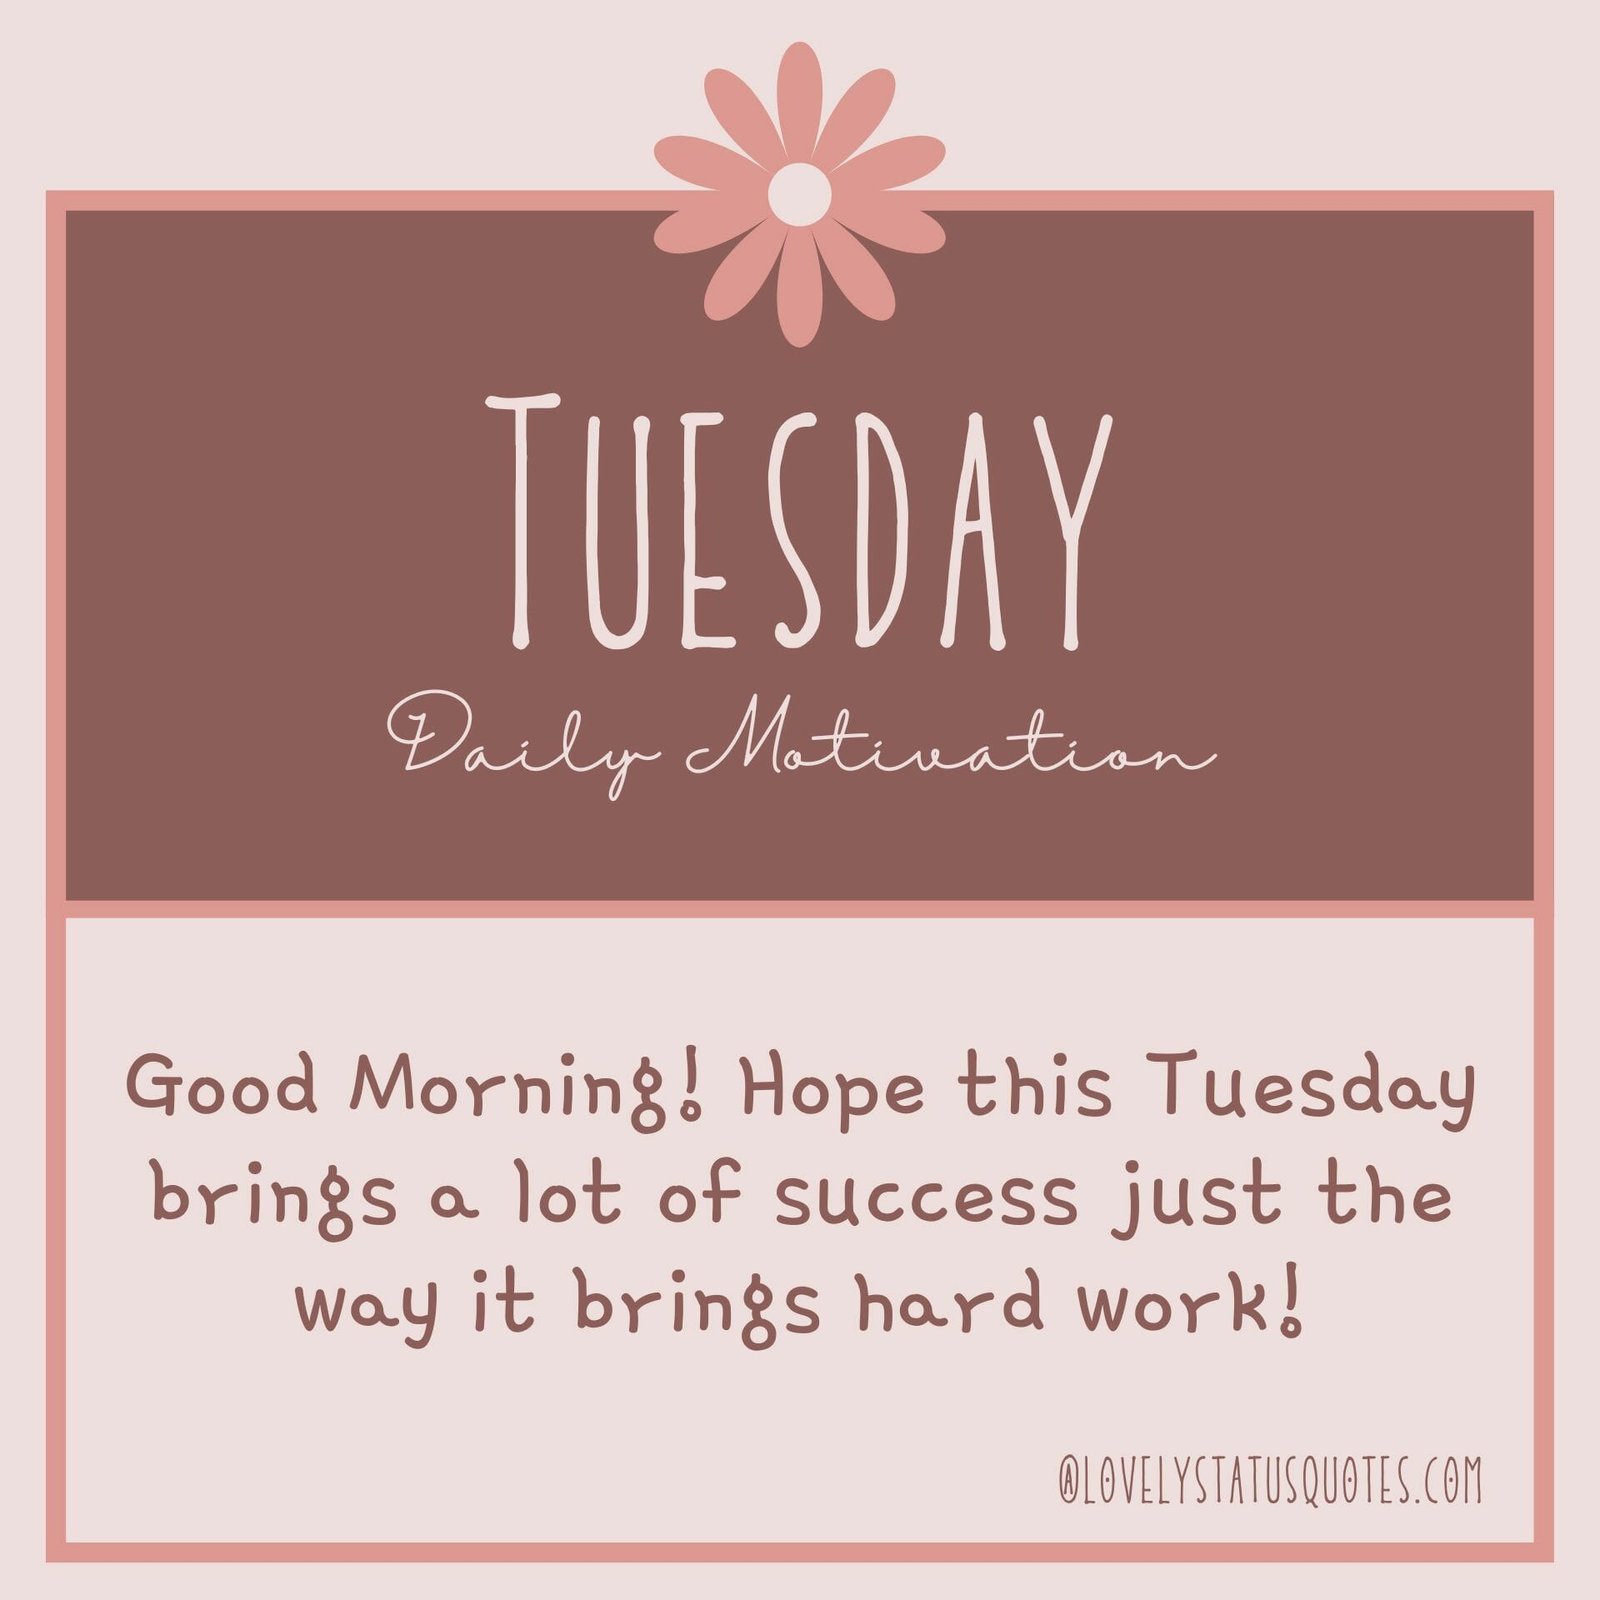 Good Morning Hope This Tuesday Brings A Lot Of Success Just The Way It Brings Hard Work 